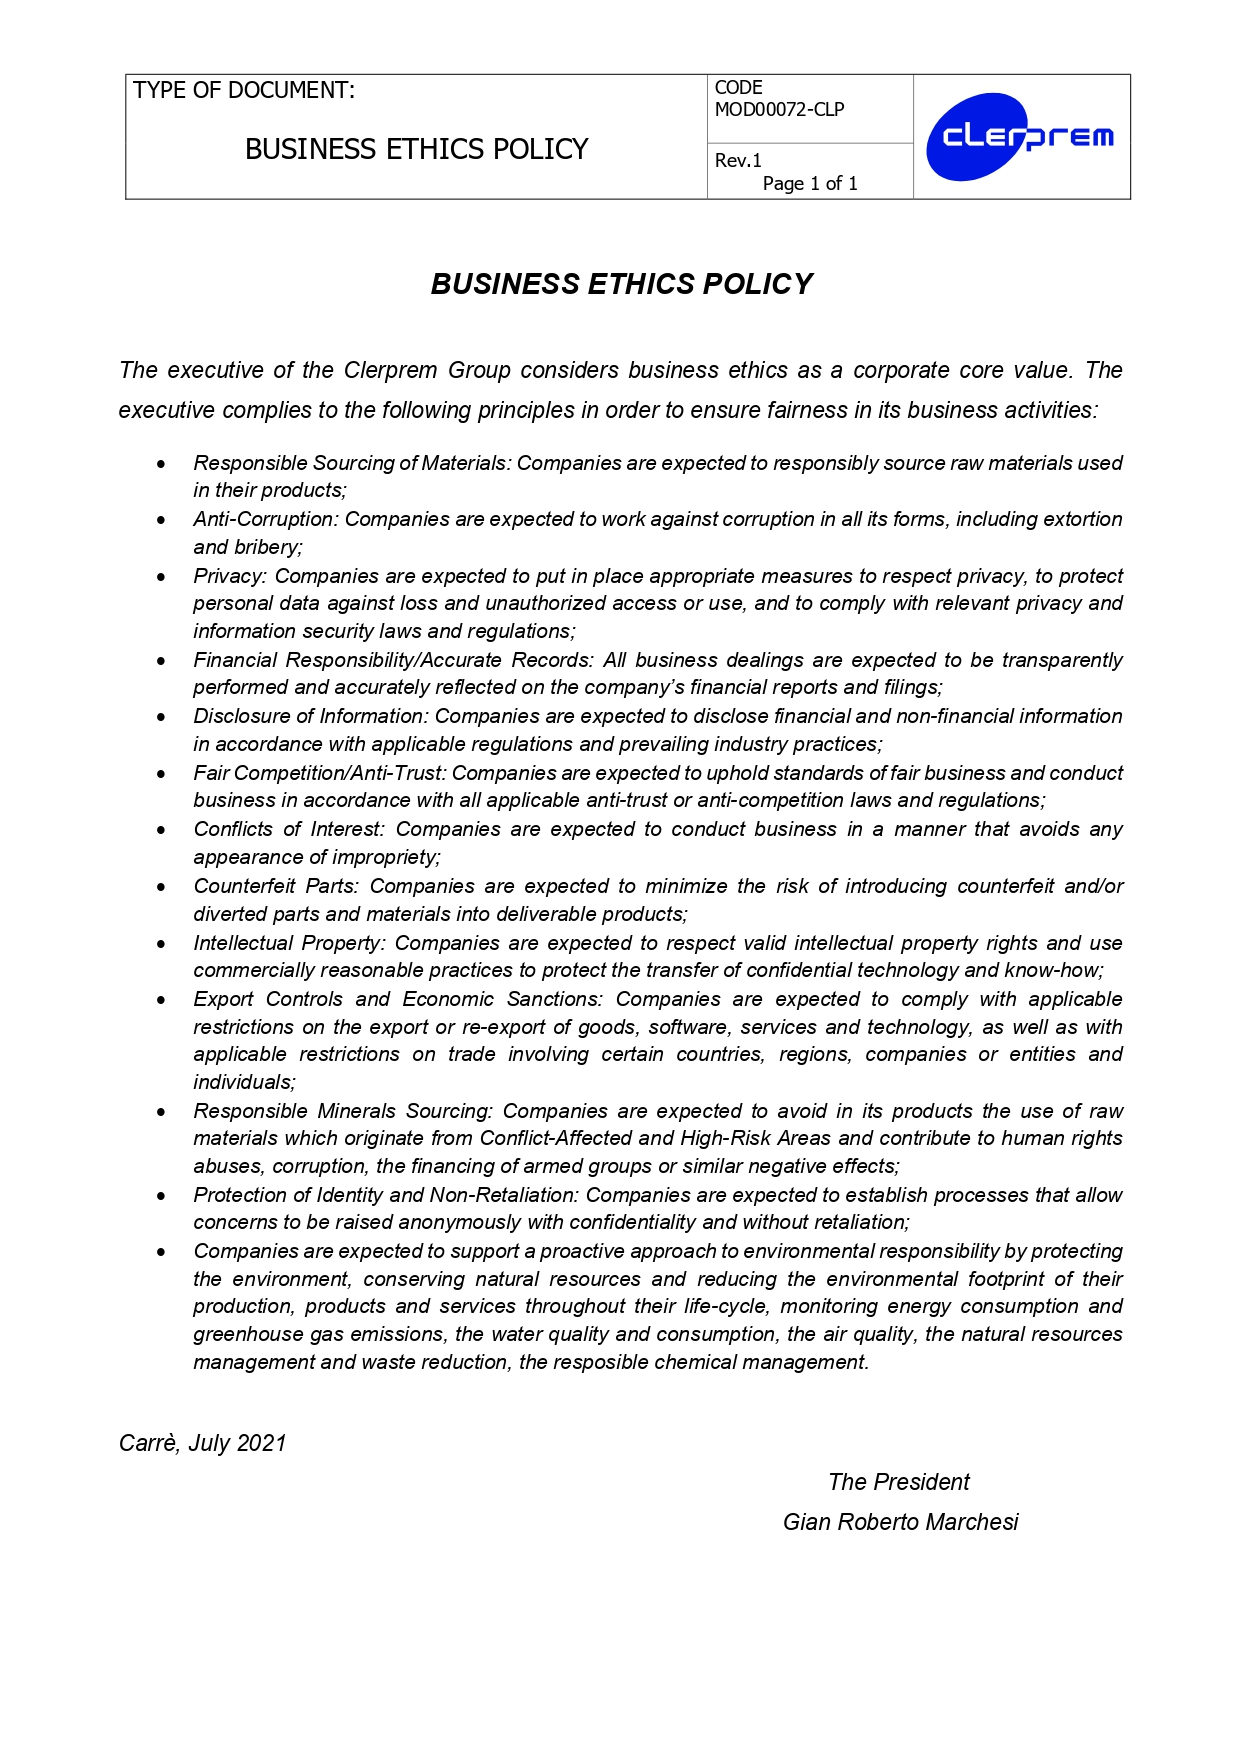 MOD00072-CLP-Business-Ethics-Policy-rev1